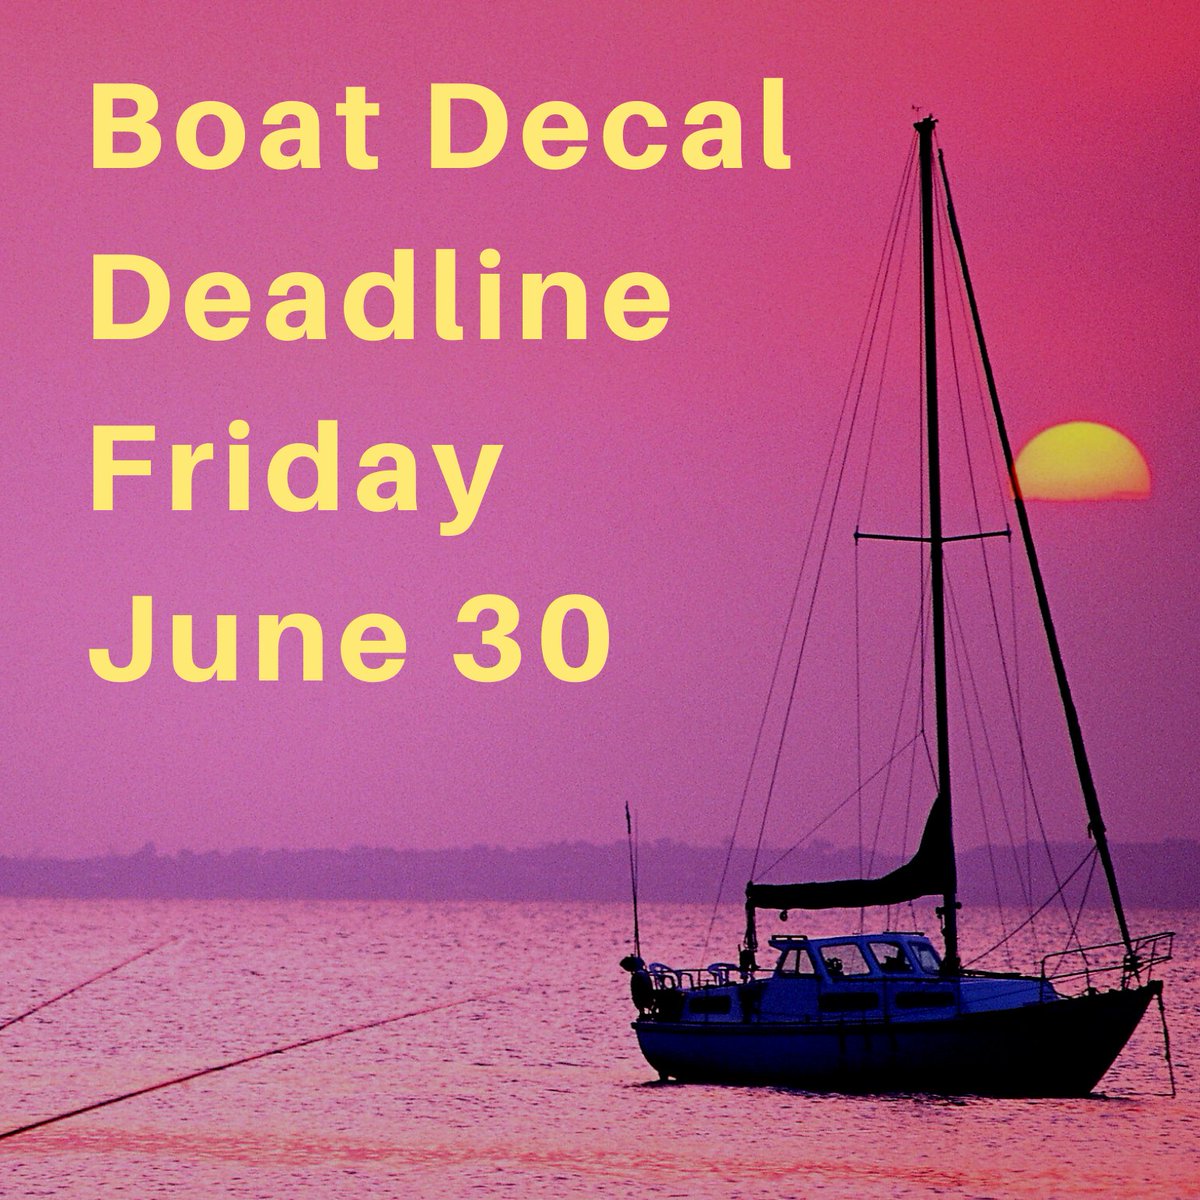 Don't ruin your summer! The deadline to renew your boat decals is this Friday, June 30. Find out how to renew at ThurstonAuditor.gov